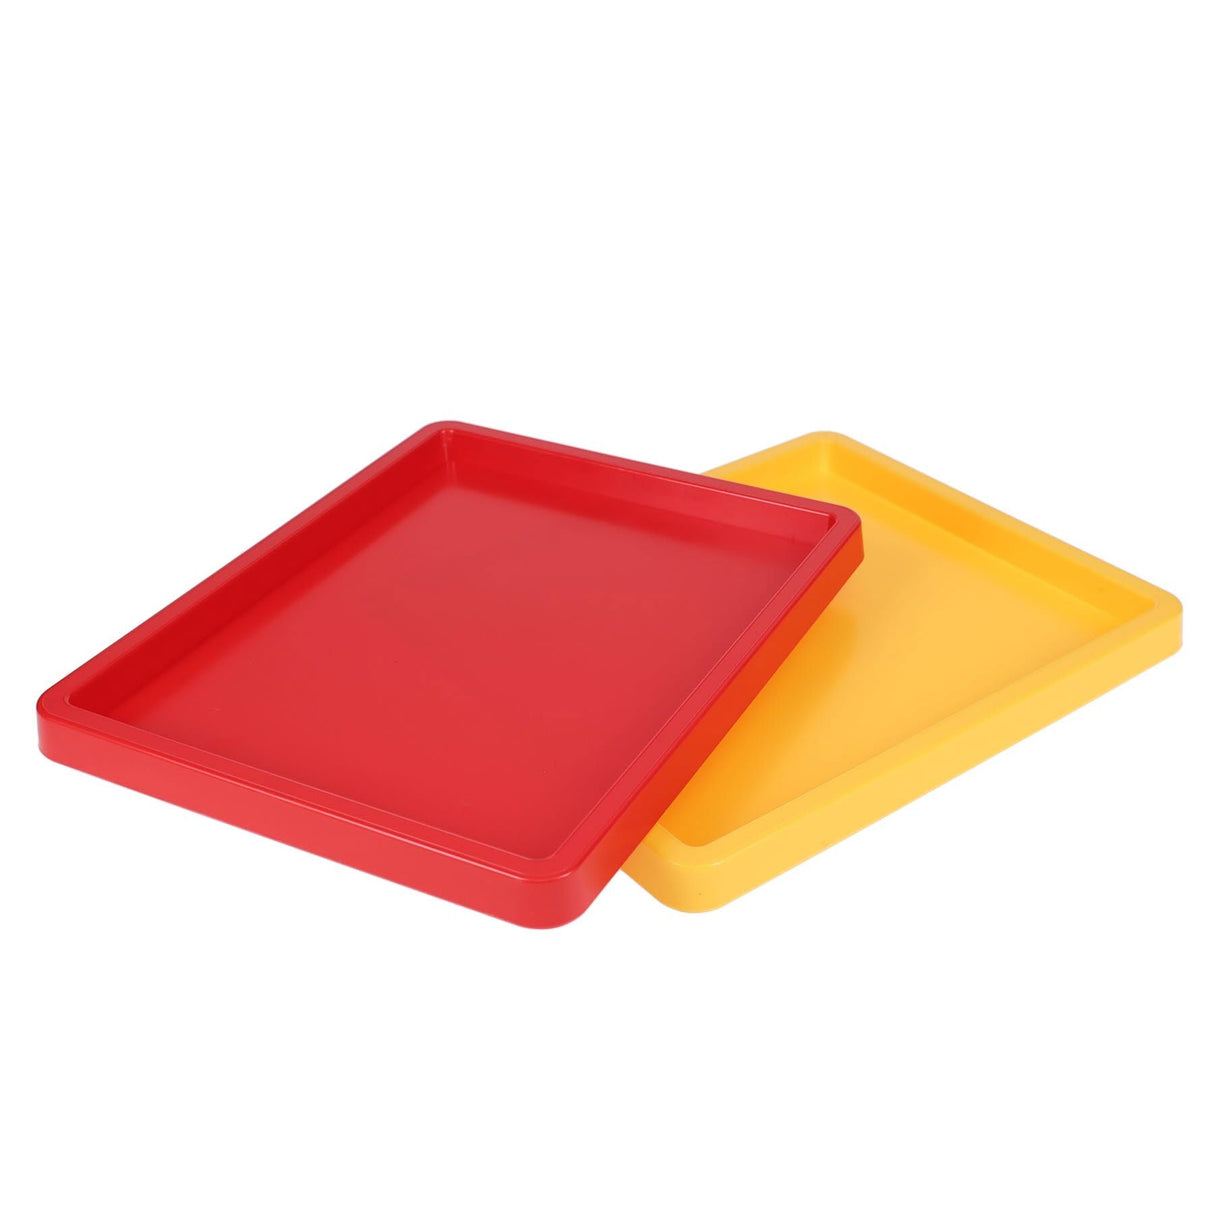 World of Colour Multi-Purpose Art Trays - Pack of 2-Palettes & Knives-World of Colour|StationeryShop.co.uk